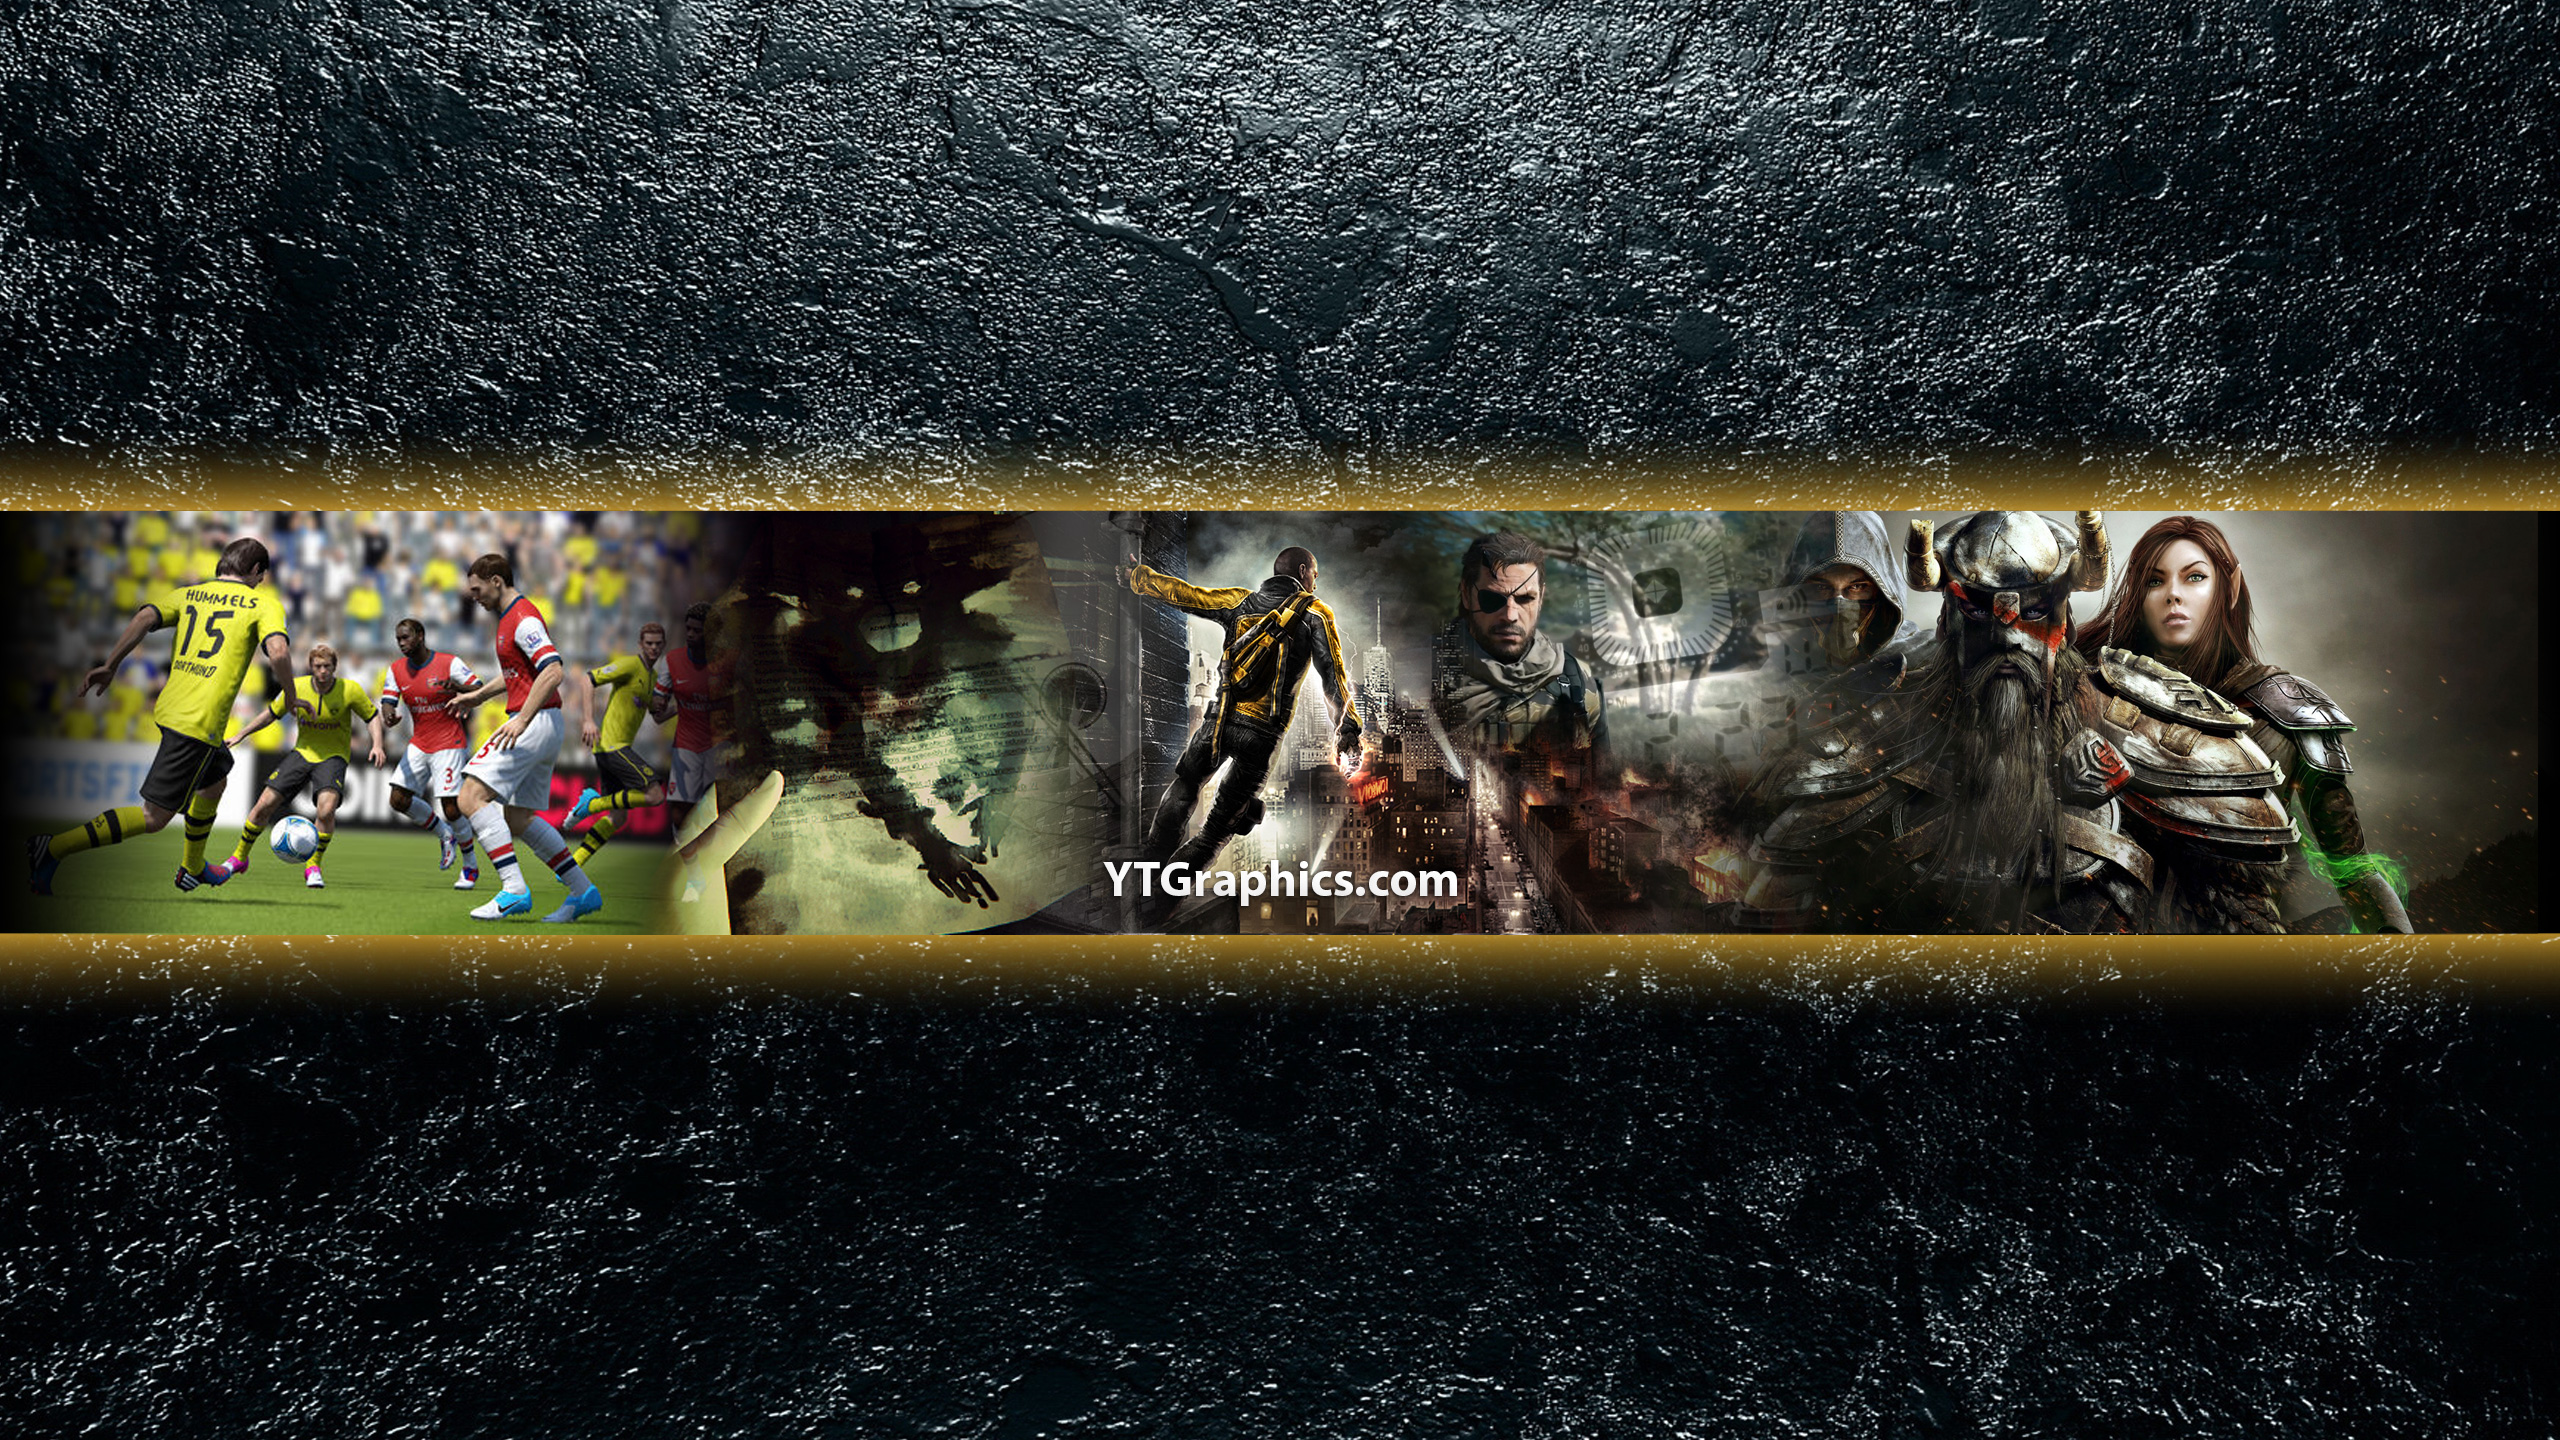 Games of April 2014 - YouTube Channel Art Banners - 2560 x 1440 jpeg 1721kB